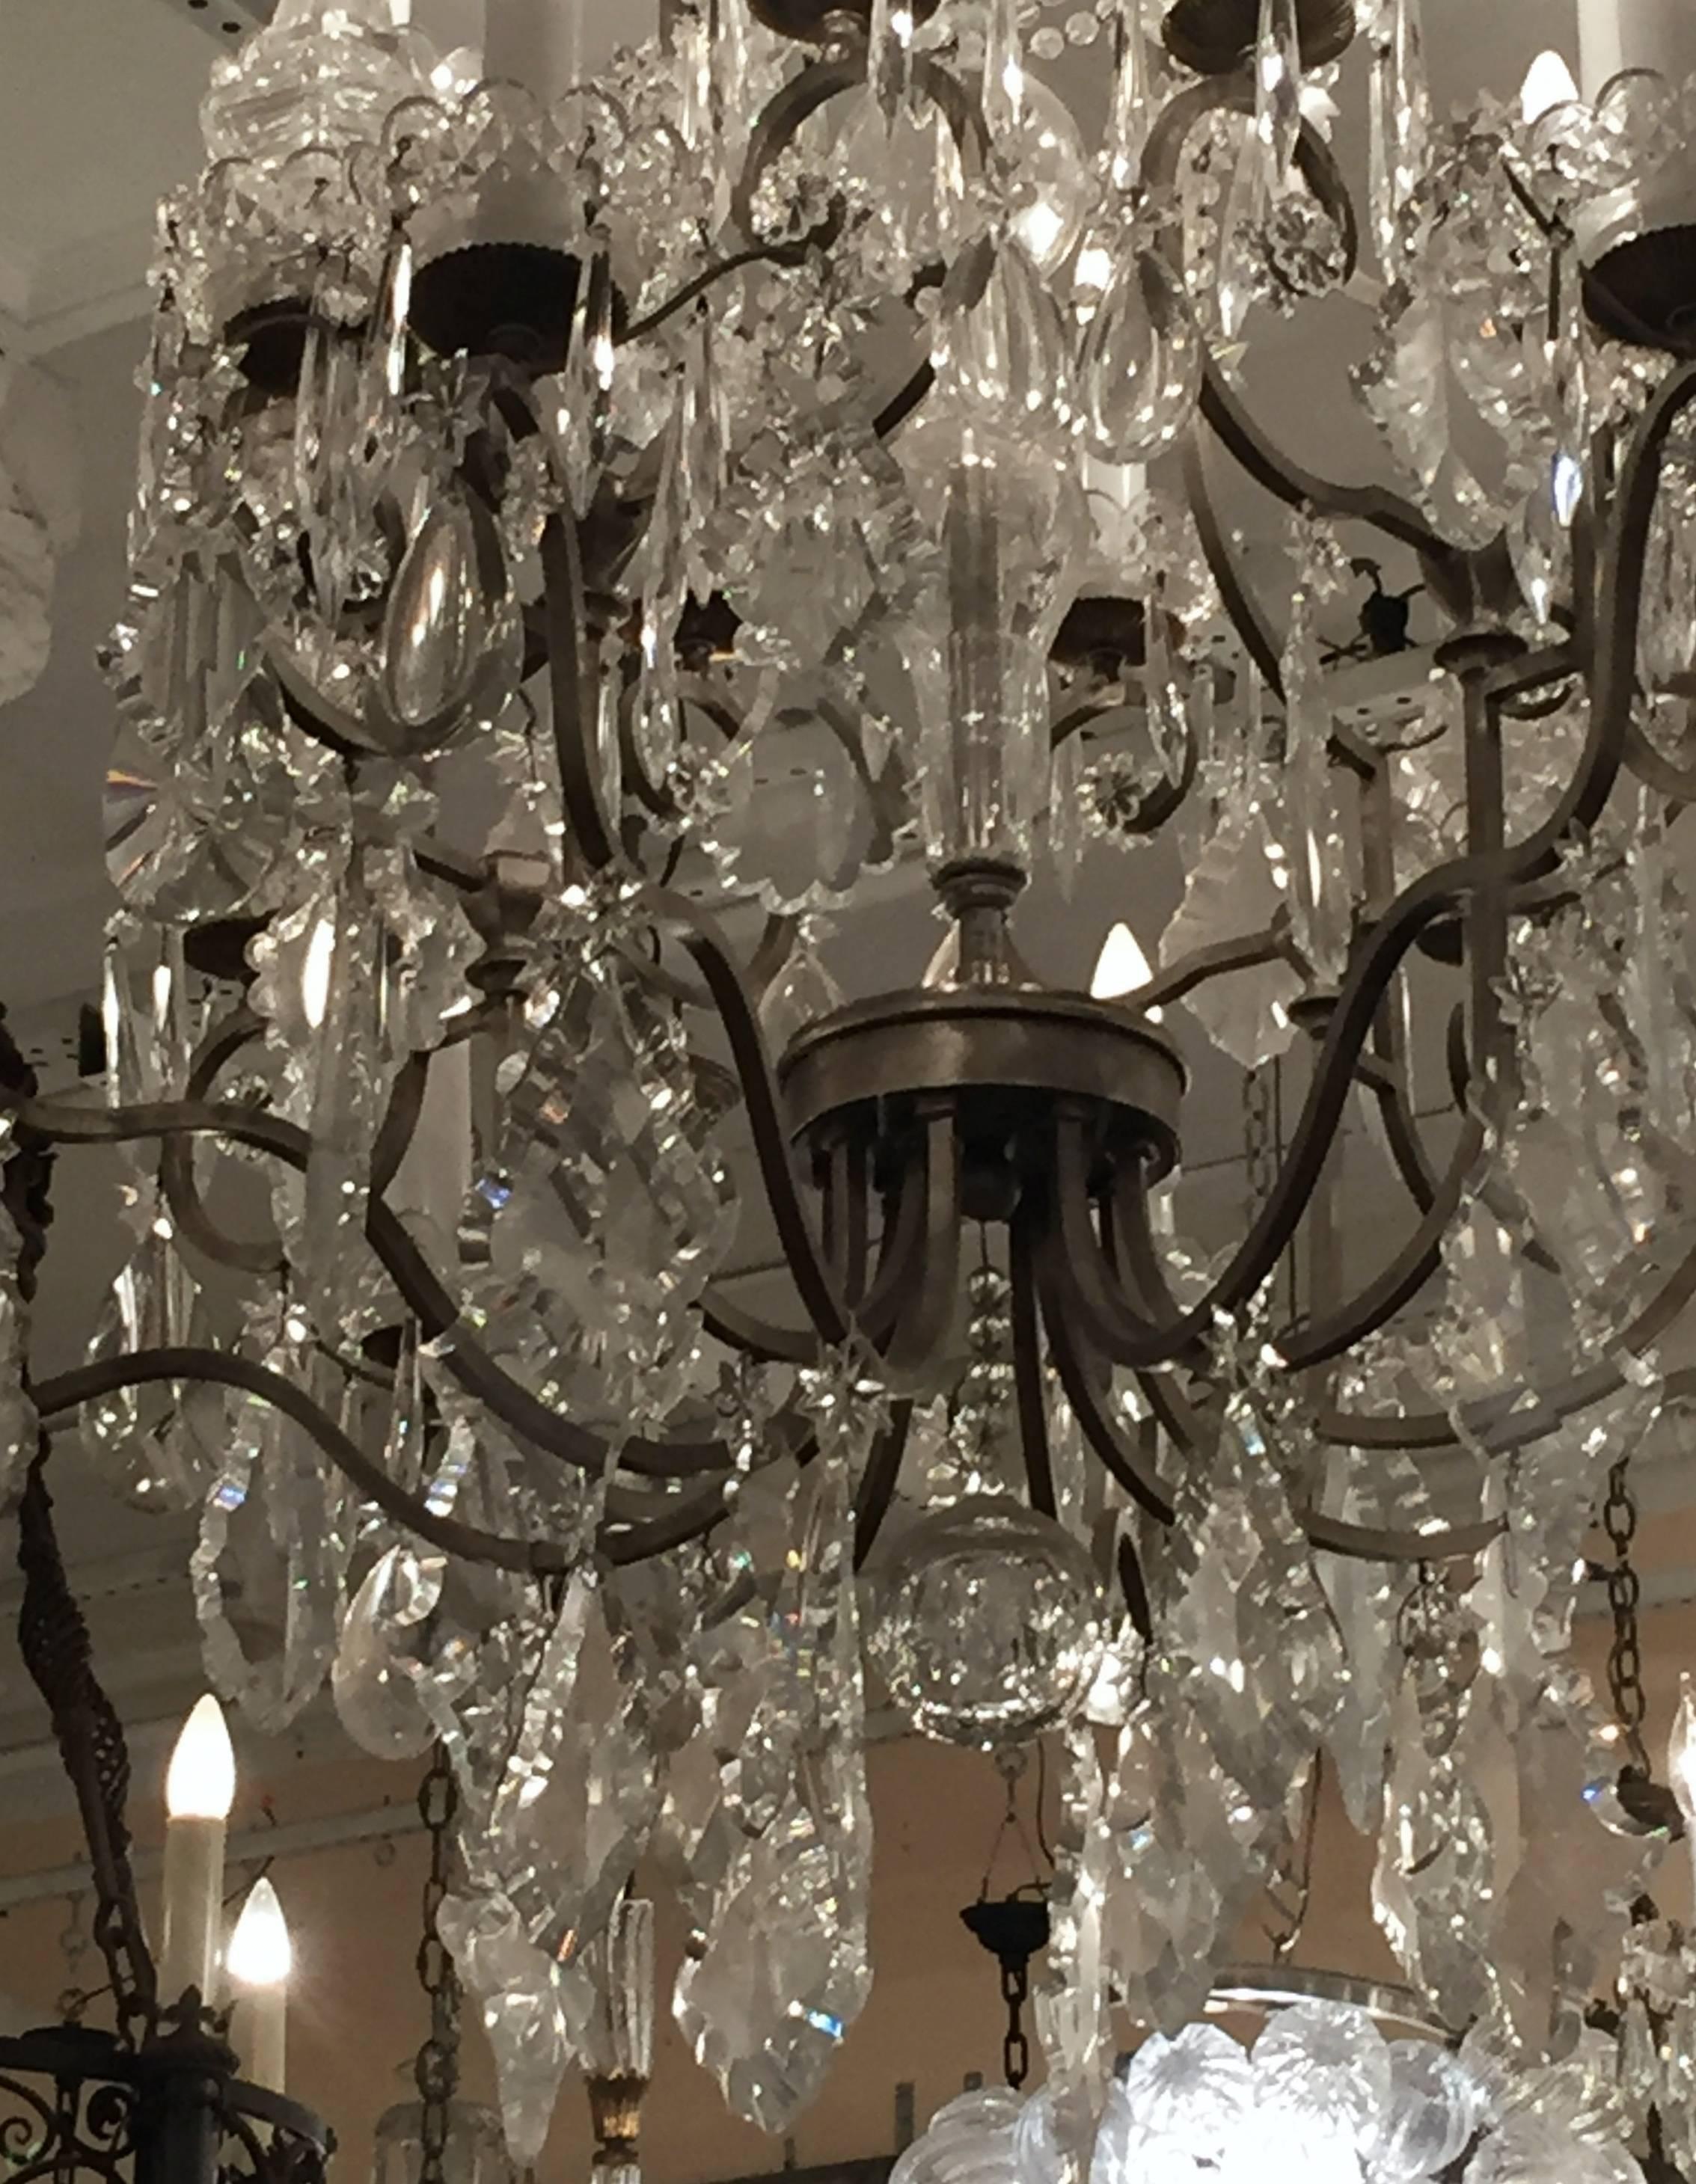 Large 16 light original Plaza Hotel chandelier in New York City. Price includes restoration. Small quantity available at time of posting. Priced each. Please inquire. Please note, this item is located in our Scranton, PA location.